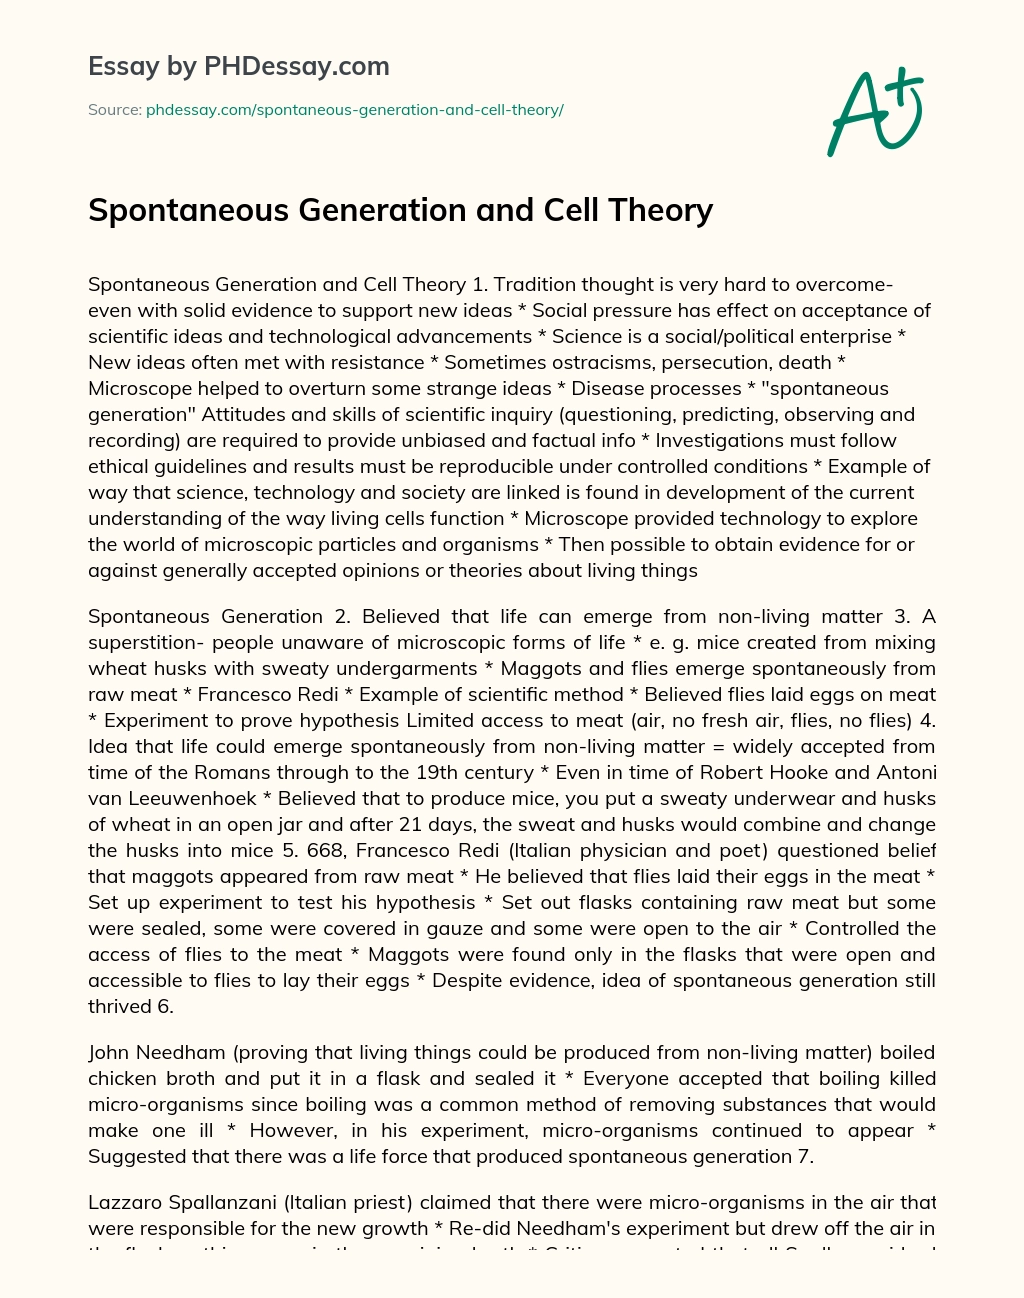 Spontaneous Generation and Cell Theory essay